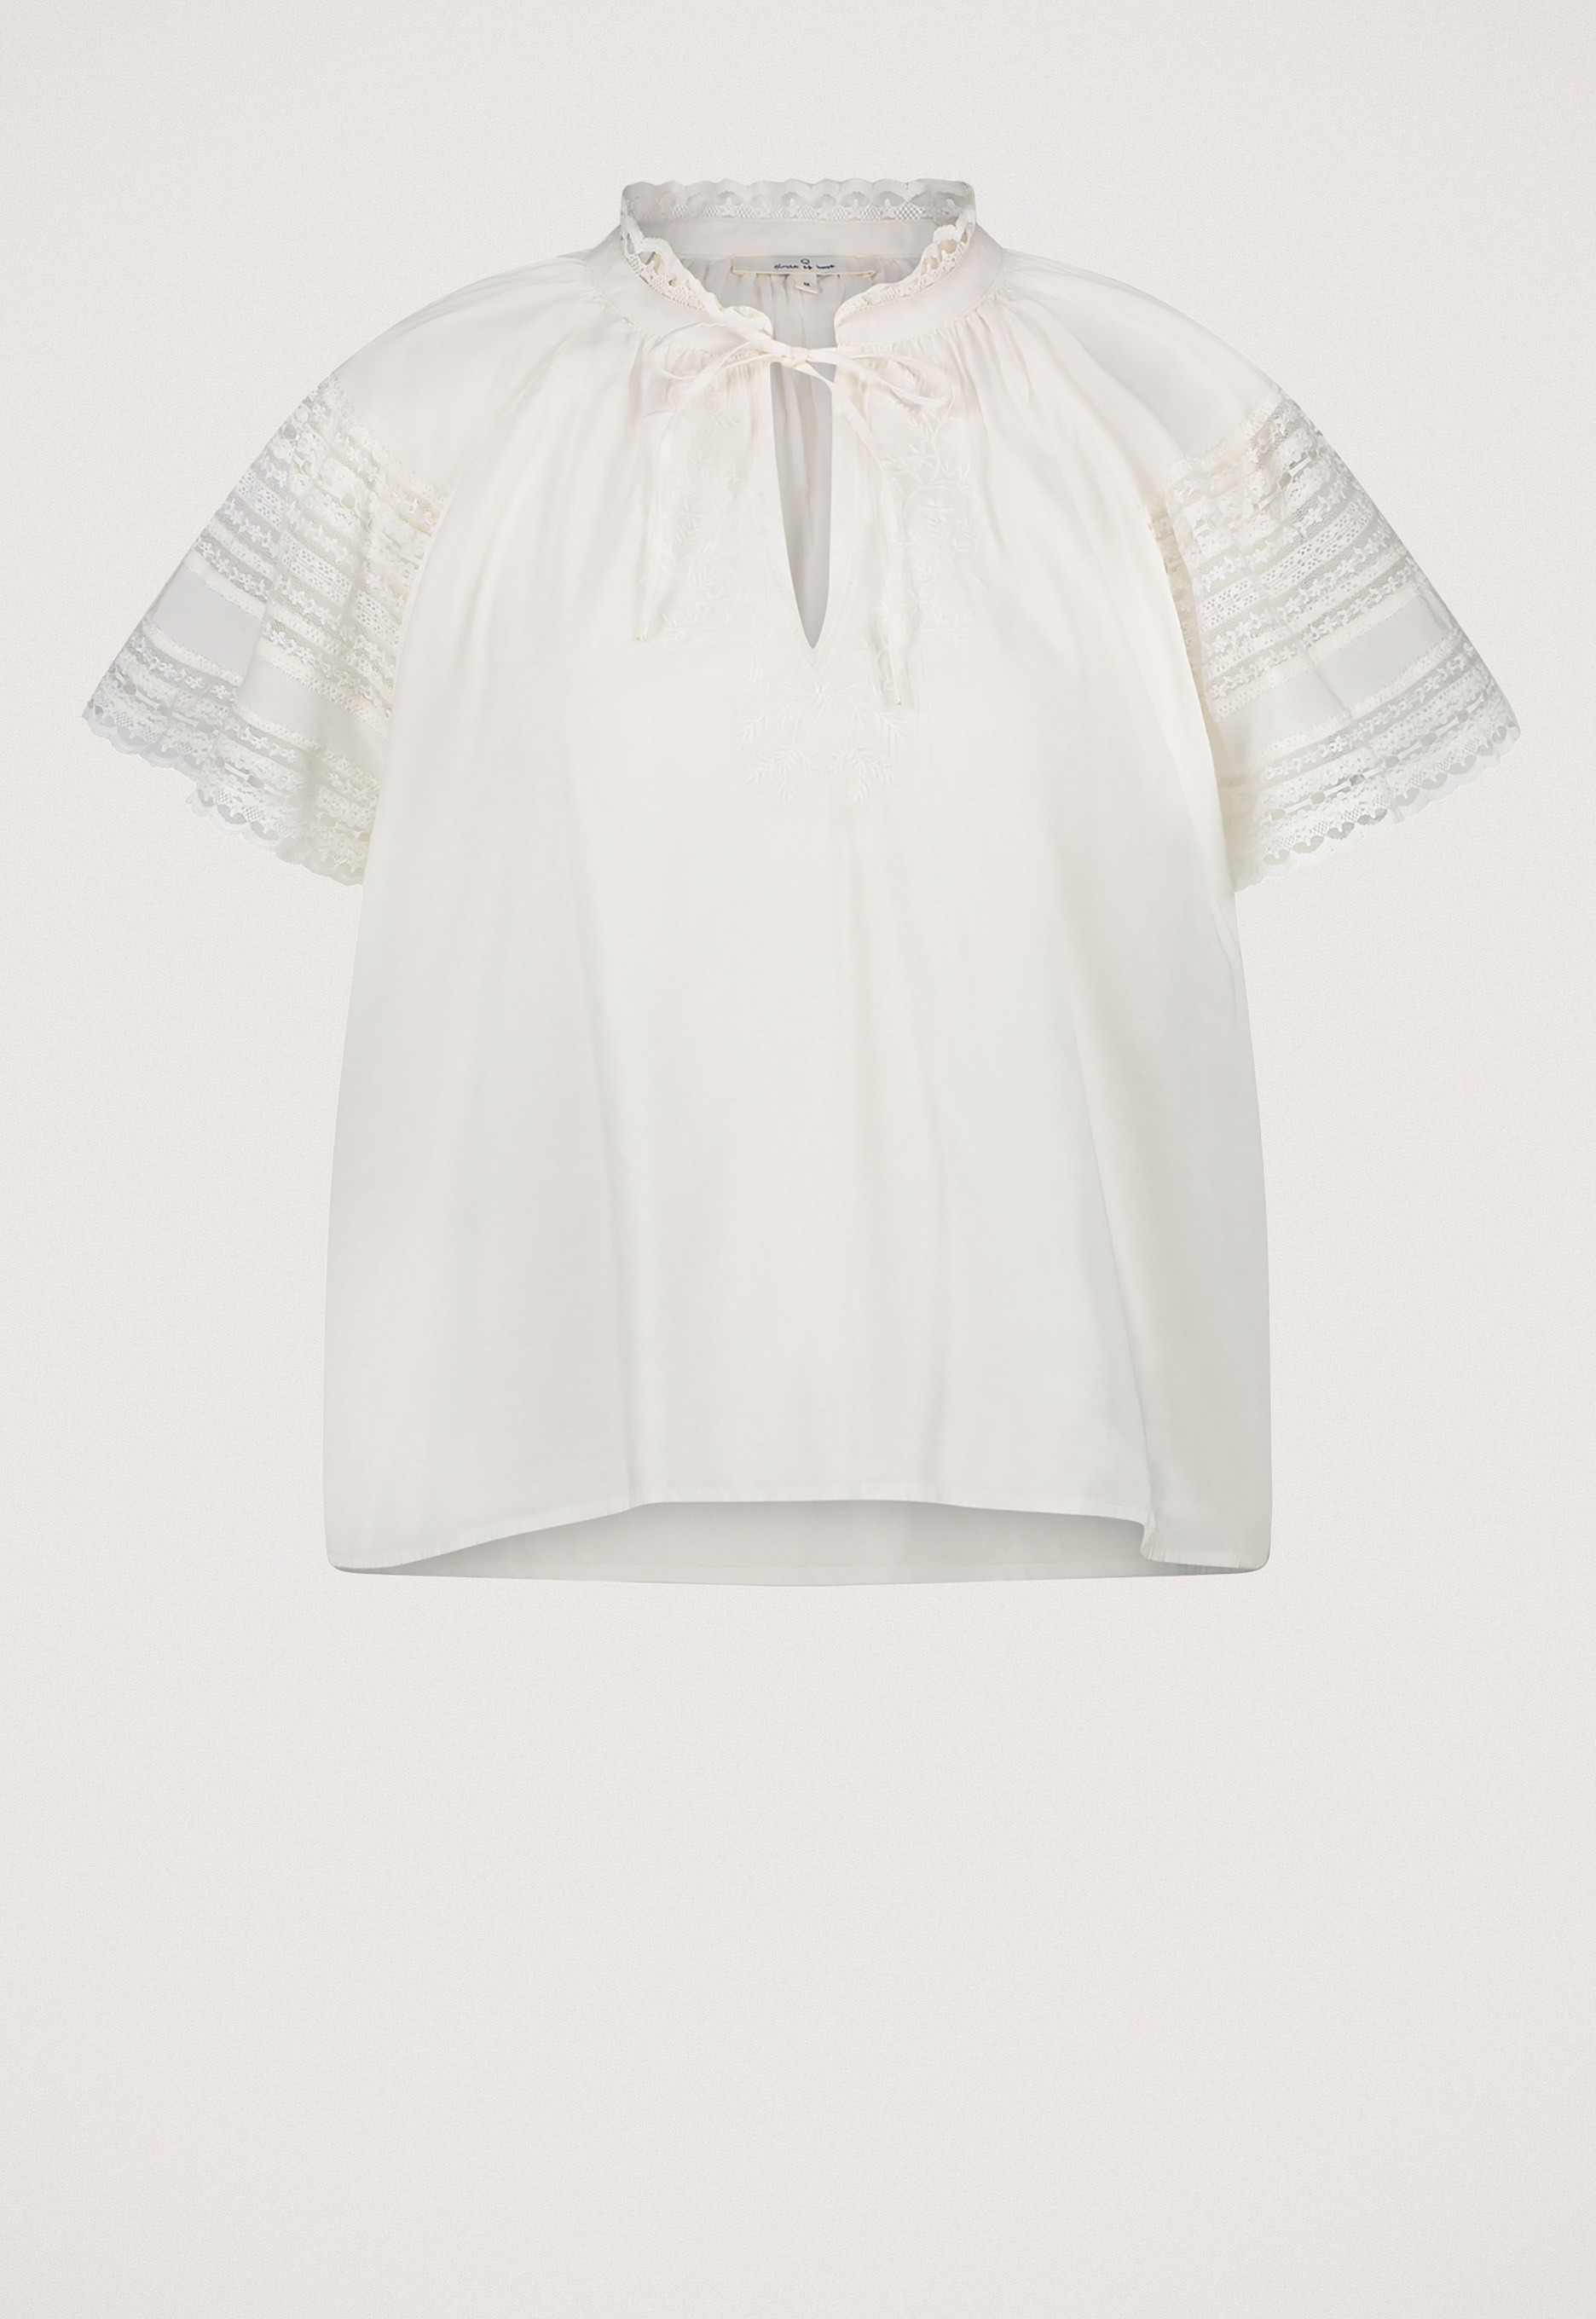 Circle of trust Kylie Blouse